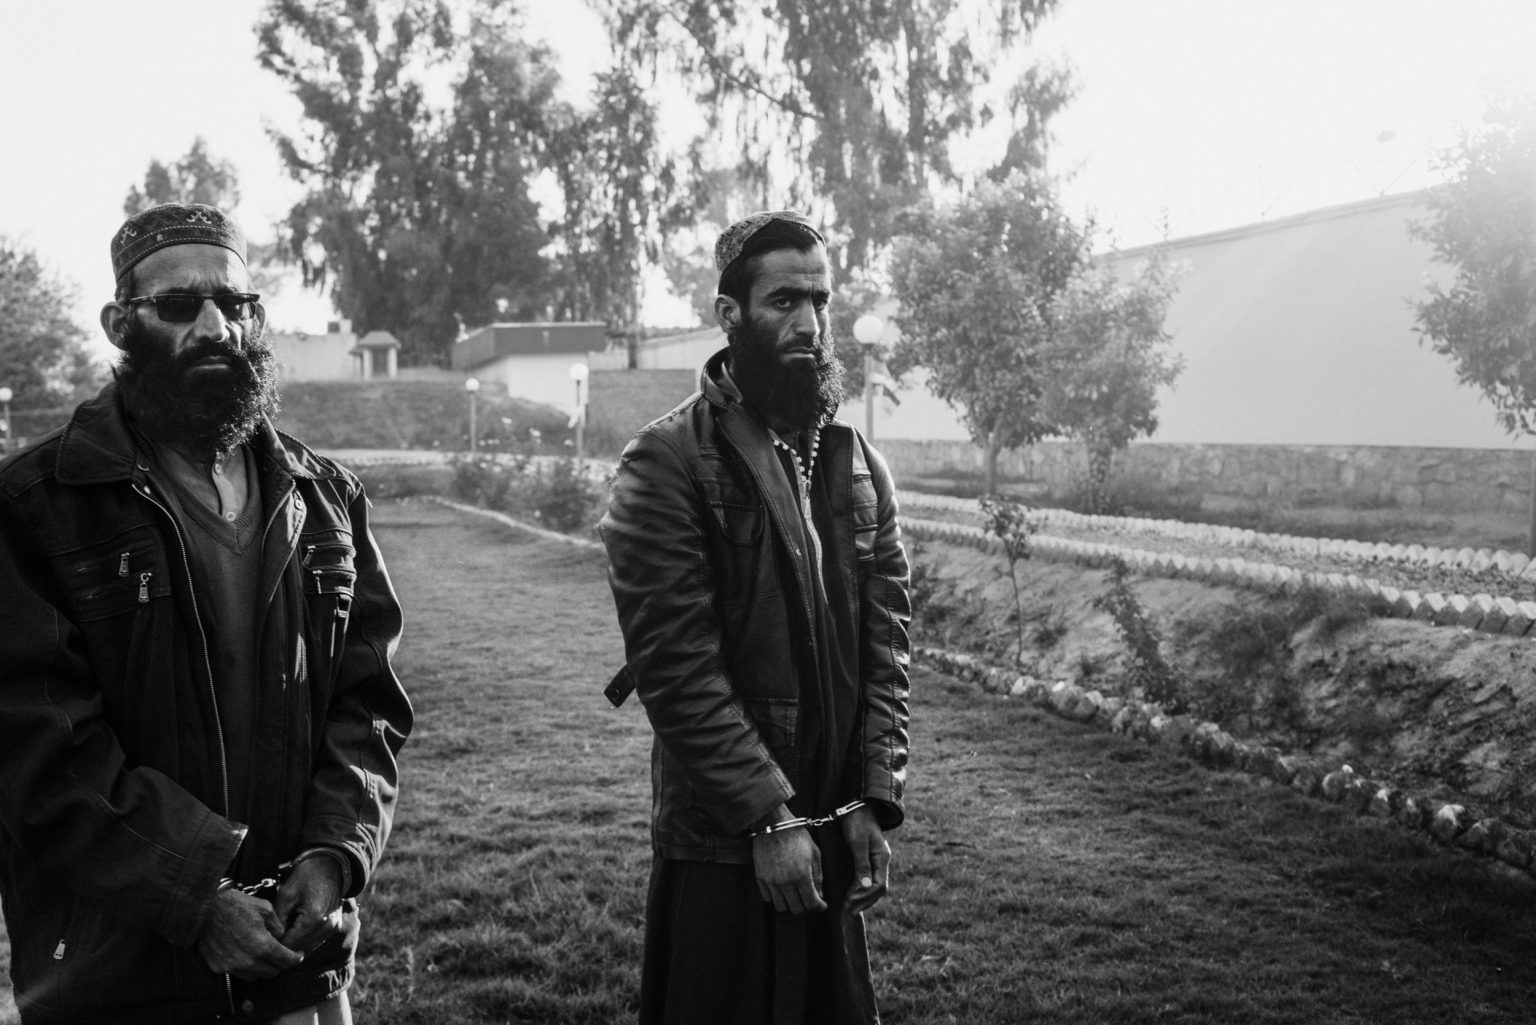 Achin, Afghanistan, November 2019 -  Abdul Mateen (left), 45 year old, originally from Pakistan, was a member of ISIS religious police in Achin. He prevented illegal drug cultivation and made sure everybody prayed five times a day. He was a member of the Pakistani Taliban and came to Afghanistan when the Pakistani army launched an operation in the border areas. He then the pledged allegiance to ISIS together with the other fighters.  Rahmatullah Sufyan (right), 30 years old, is also originally from Pakistan. He was a member of the Pakistani Taliban and came to Afghanistan when the Pakistani army launched an operation in the border areas. He then the pledged allegiance to ISIS together with the other fighters. Rahmatullah was injured in a drone attack and he spent two month bedridden in hospital. They both surrendered to Afghan forces before the fall of ISIS in Achin and now they are in detention. >< 
Achin, Afganistan, novembre 2019 - Abdul Mateen (a sinistra), 45 anni, originario del Pakistan, era un membro della polizia religiosa dellIS, a Achin. Ha vietato la coltivazione di droga e si è assicurato che tutti pregassero cinque volte al giorno. Era anche membro dei talebani Pakistani ed è arrivato in Afganistan quando lesercito pakistano ha lanciato unoperazione nelle aree di confine. Ha poi giurato fedeltà allIsis, insieme agli altri combattenti. Rahmatullah Sufyan (a destra), 30 anni, è anchesso originario del Pakistan. Era un membro dei talebani pakistani quando lesercito pakistano ha lanciato unoperazione nelle aree di confine. Ha poi giurato fedeltà allIsis, insieme agli altri combattenti. Rahmatullah è rimasto ferito nel corso di un attacco di drone e ha trascorso due mesi in un letto di ospedale. Sia Abdul che  Rahmatullah sis ono arresi alle forze afgane prima della caduta dellIsis ad Achin e ora sono in stato detentivo.